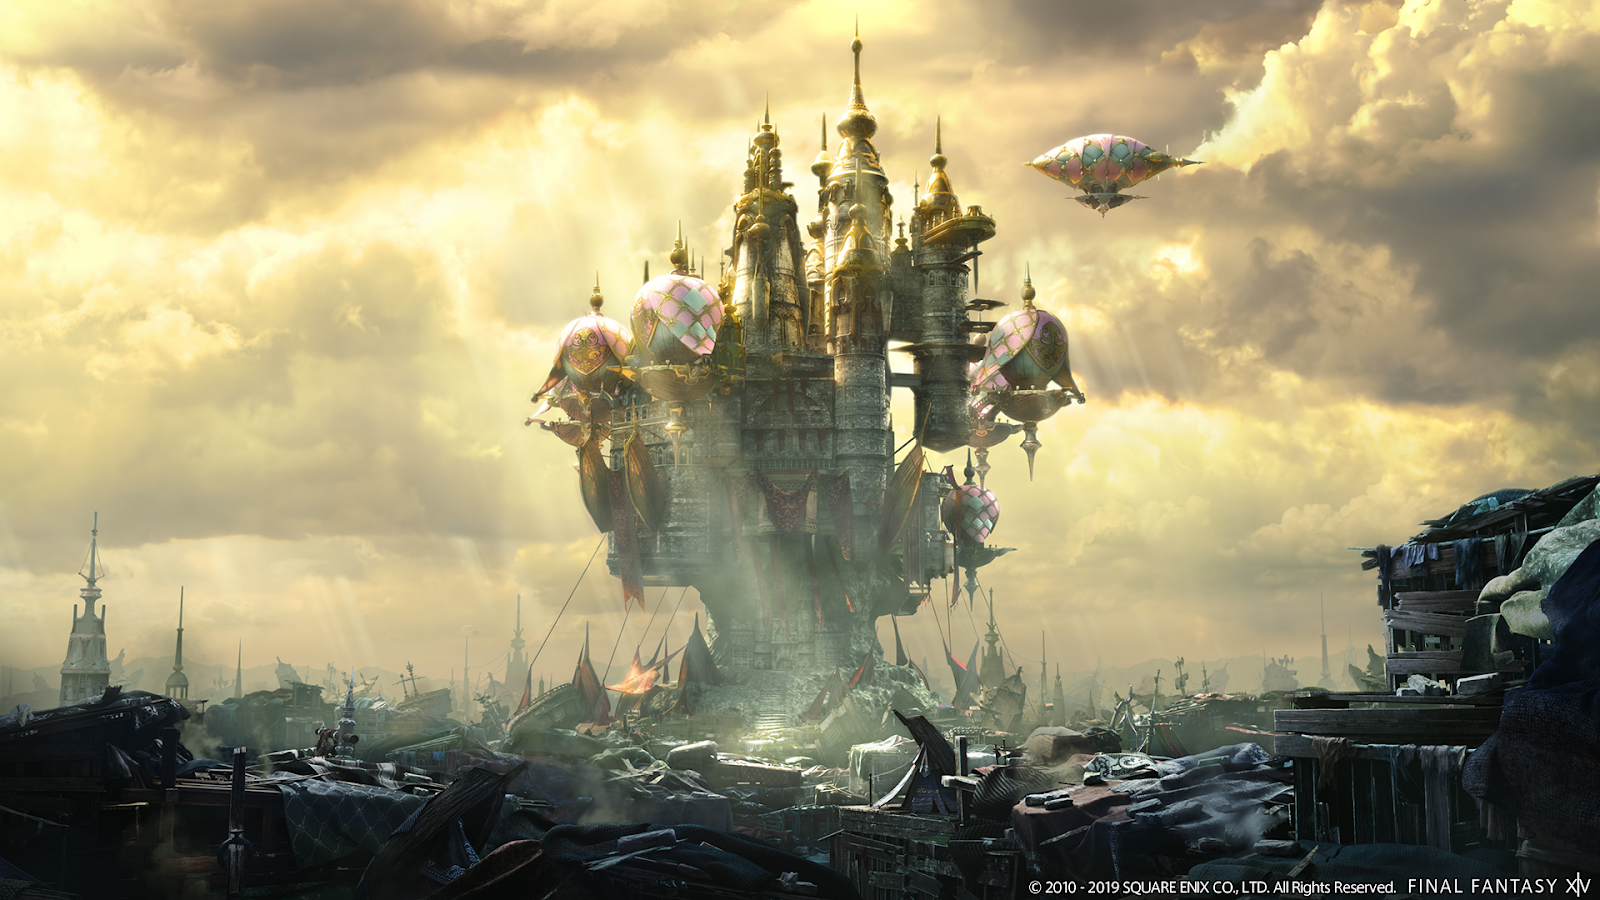 Final Fantasy Xiv S Depiction Of The World Ending Is A Bit Too Real